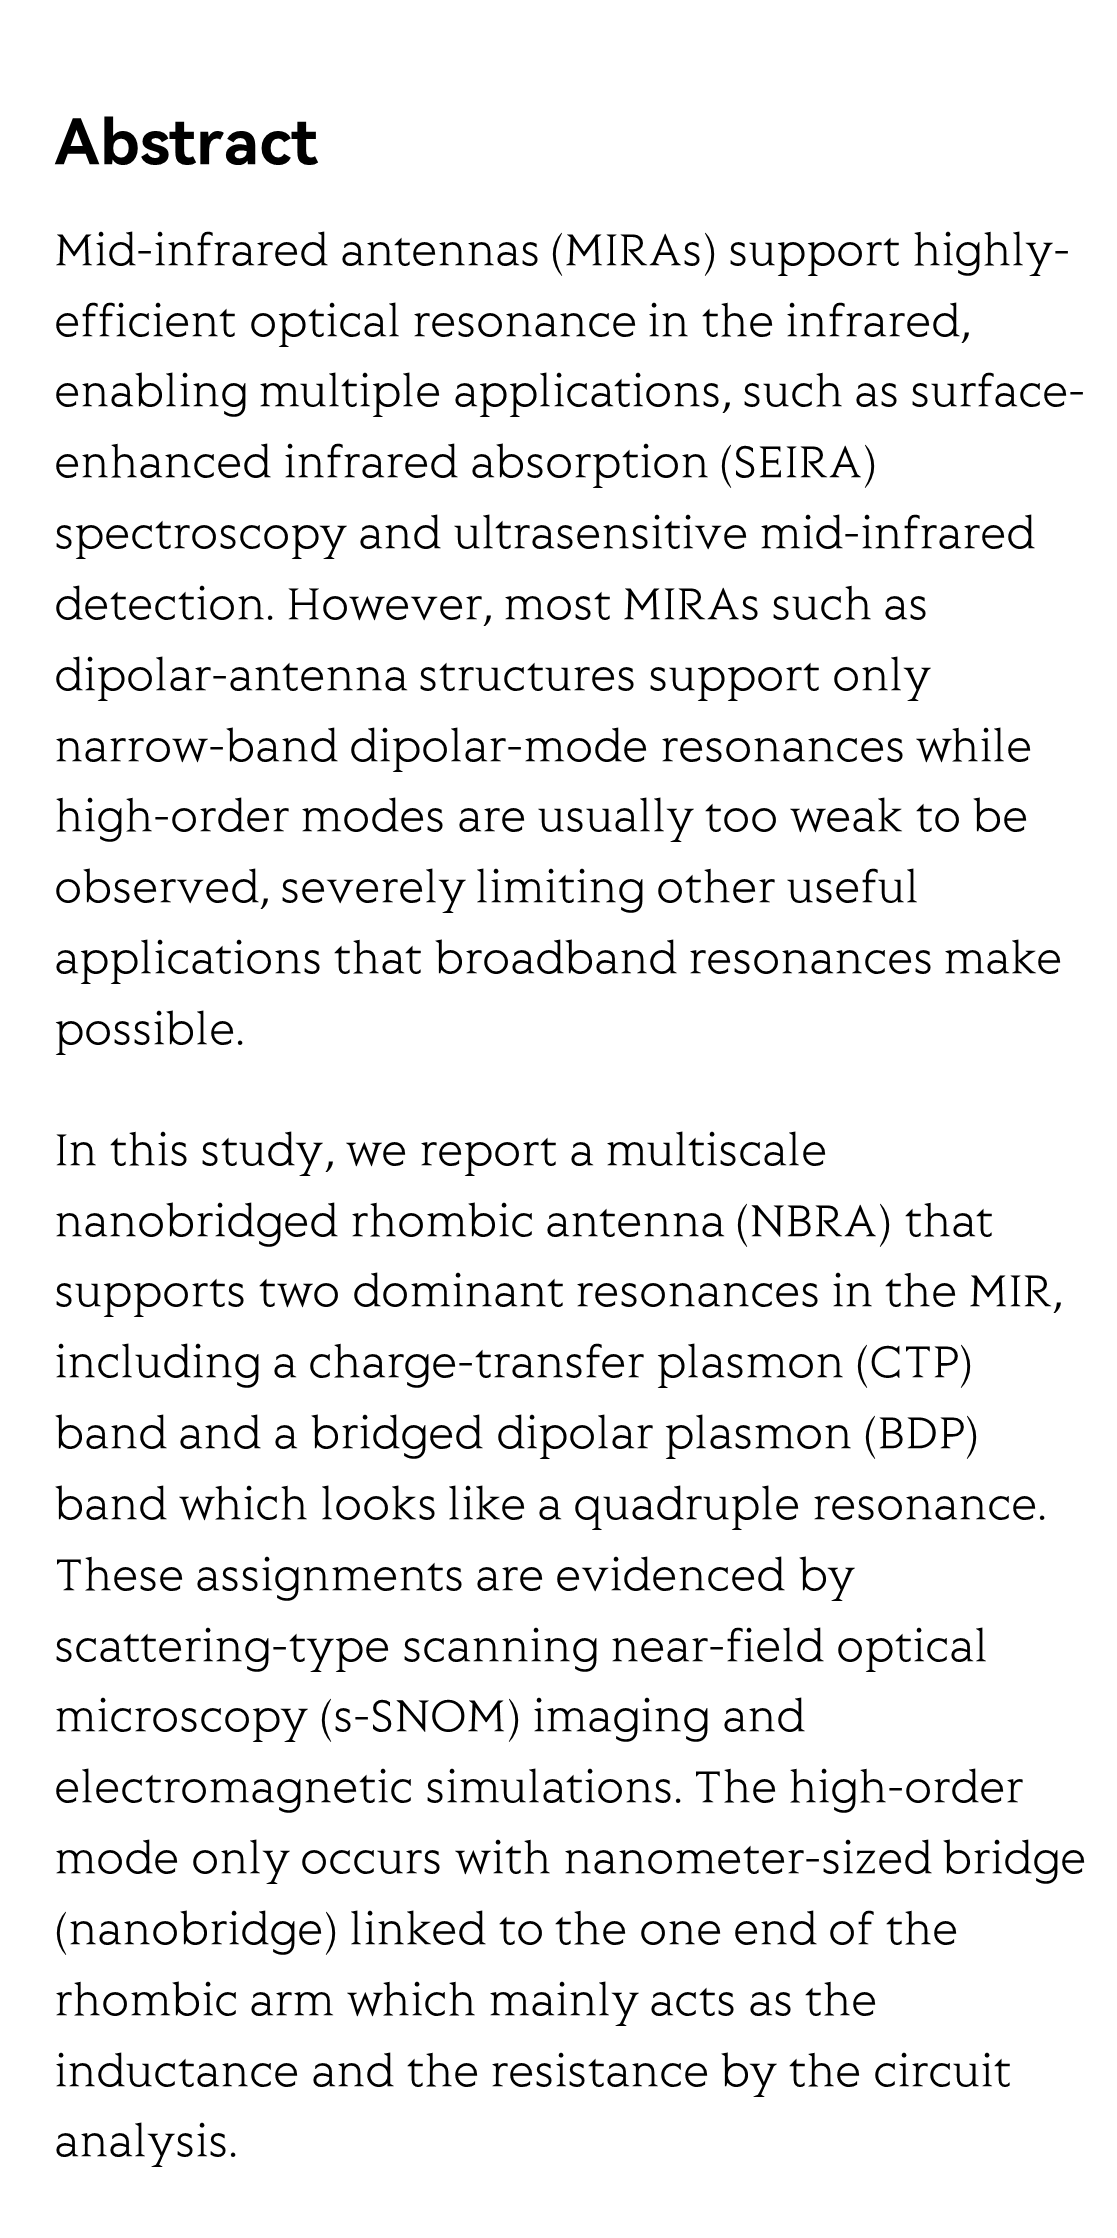 Nanobridged rhombic antennas supporting both dipolar and high-order plasmonic modes with spatially superimposed hotspots in the mid-infrared_2